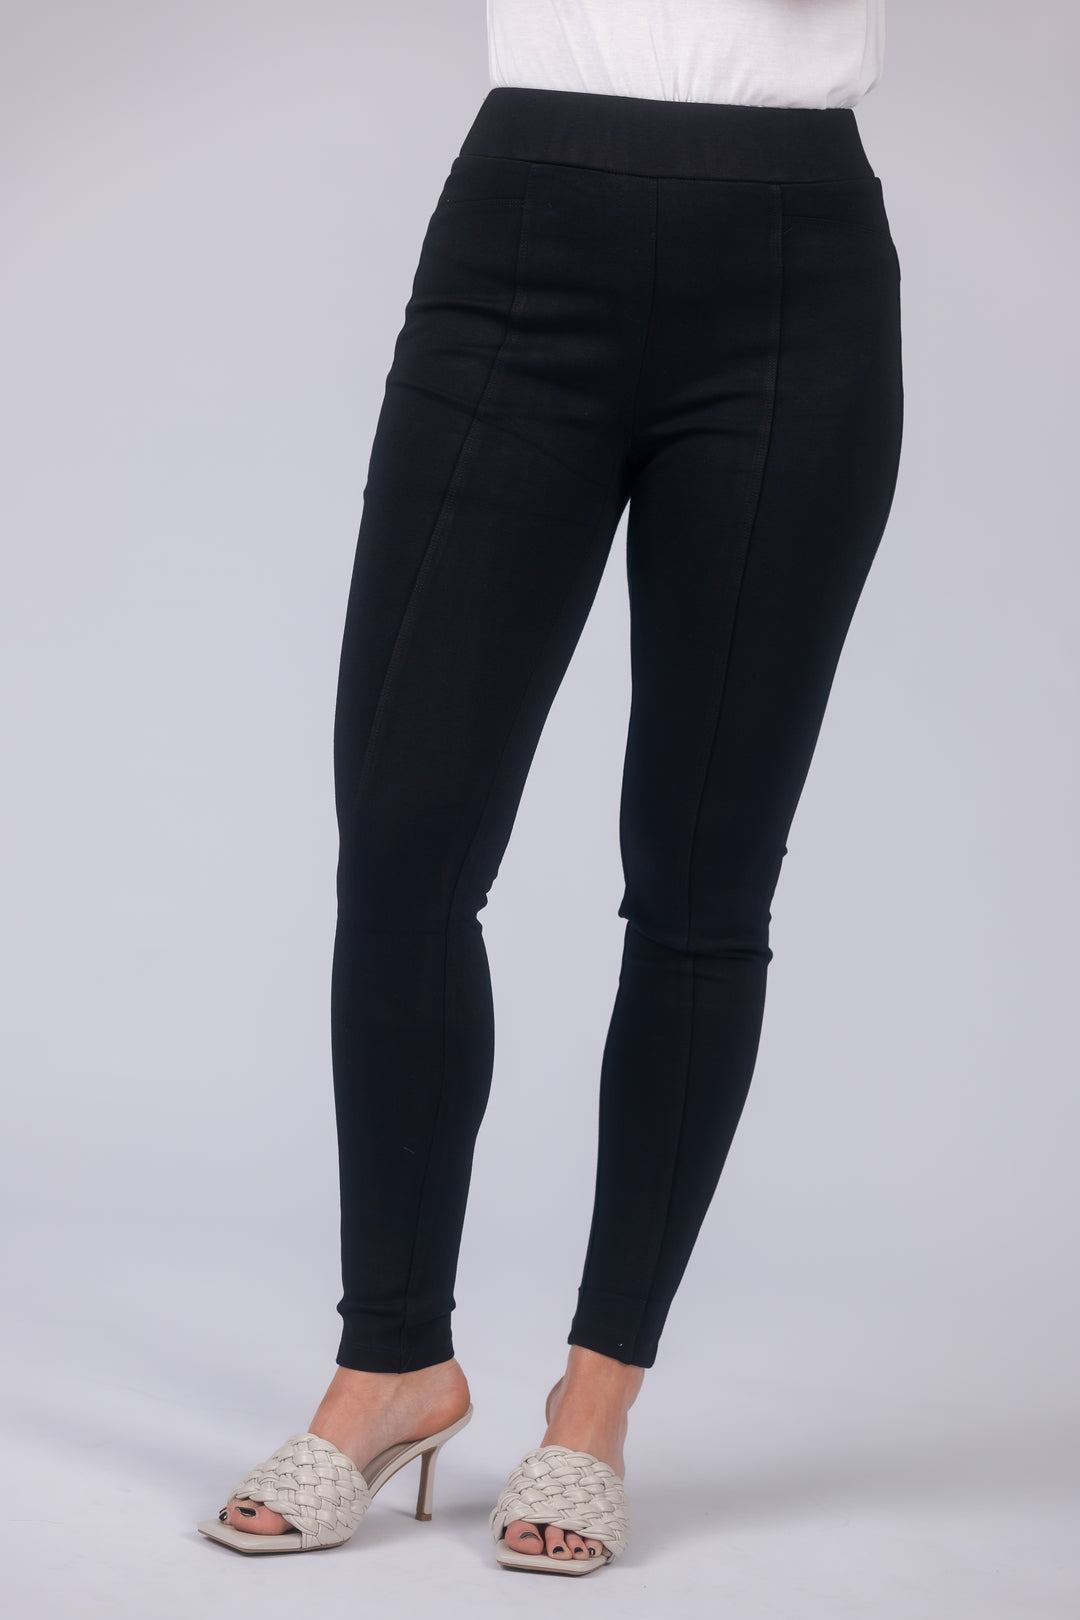 Intro Petite Size Bella Solid Double Knit Slim Her Leggings